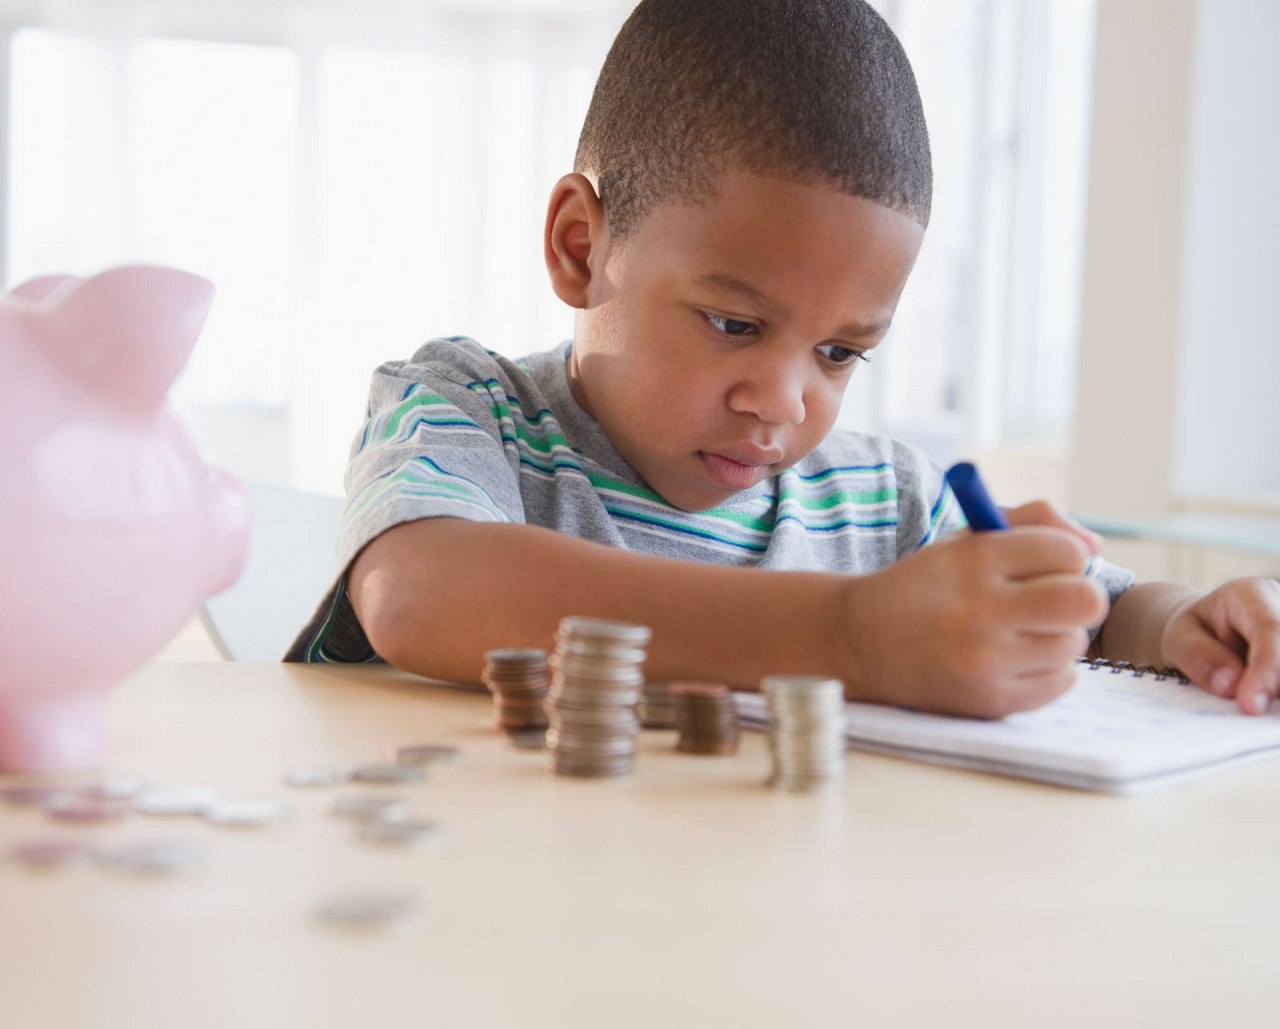 kid making notes sitting with money and piggy bank